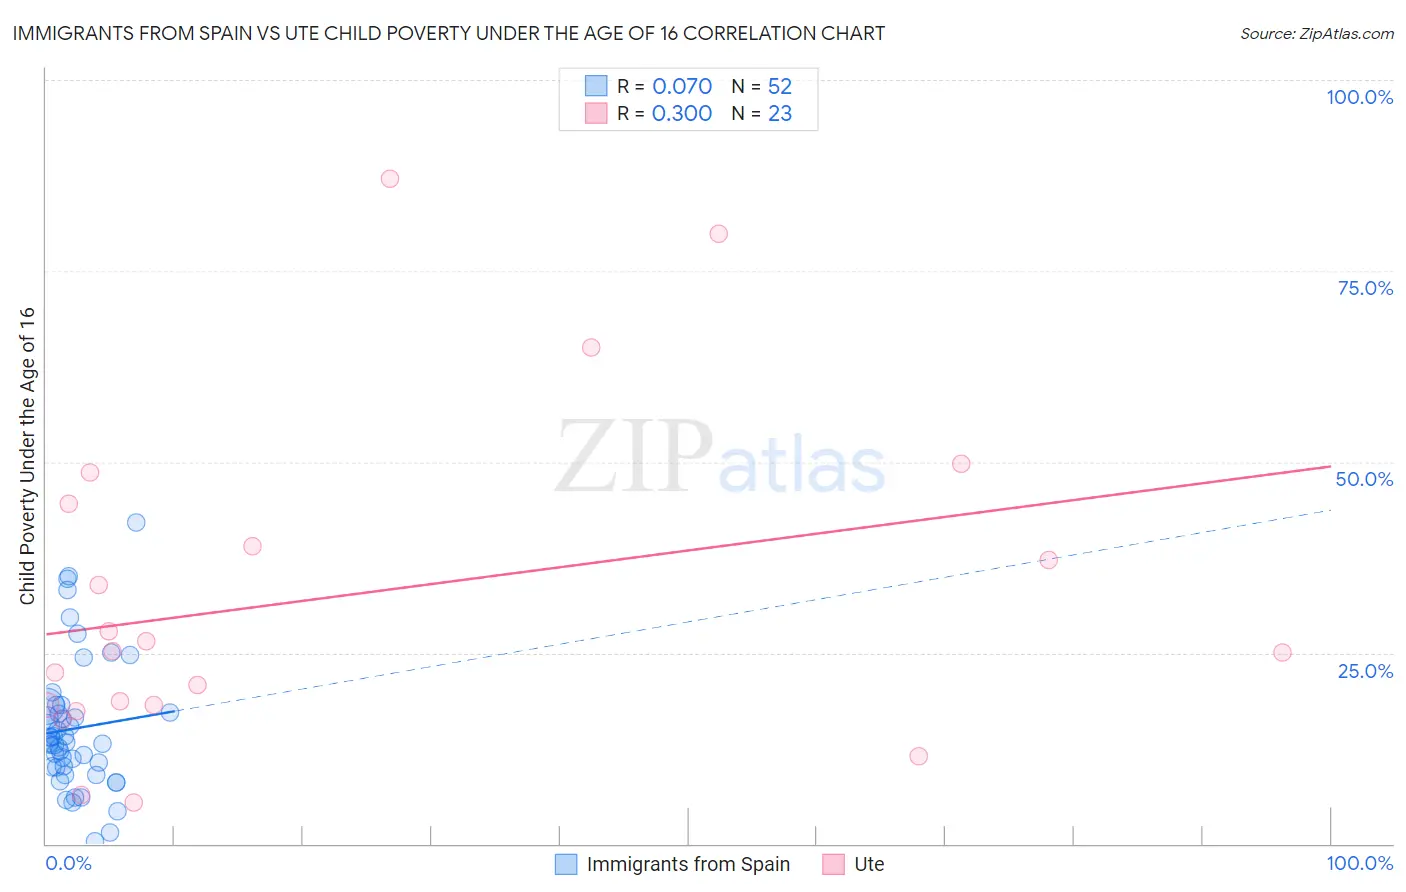 Immigrants from Spain vs Ute Child Poverty Under the Age of 16